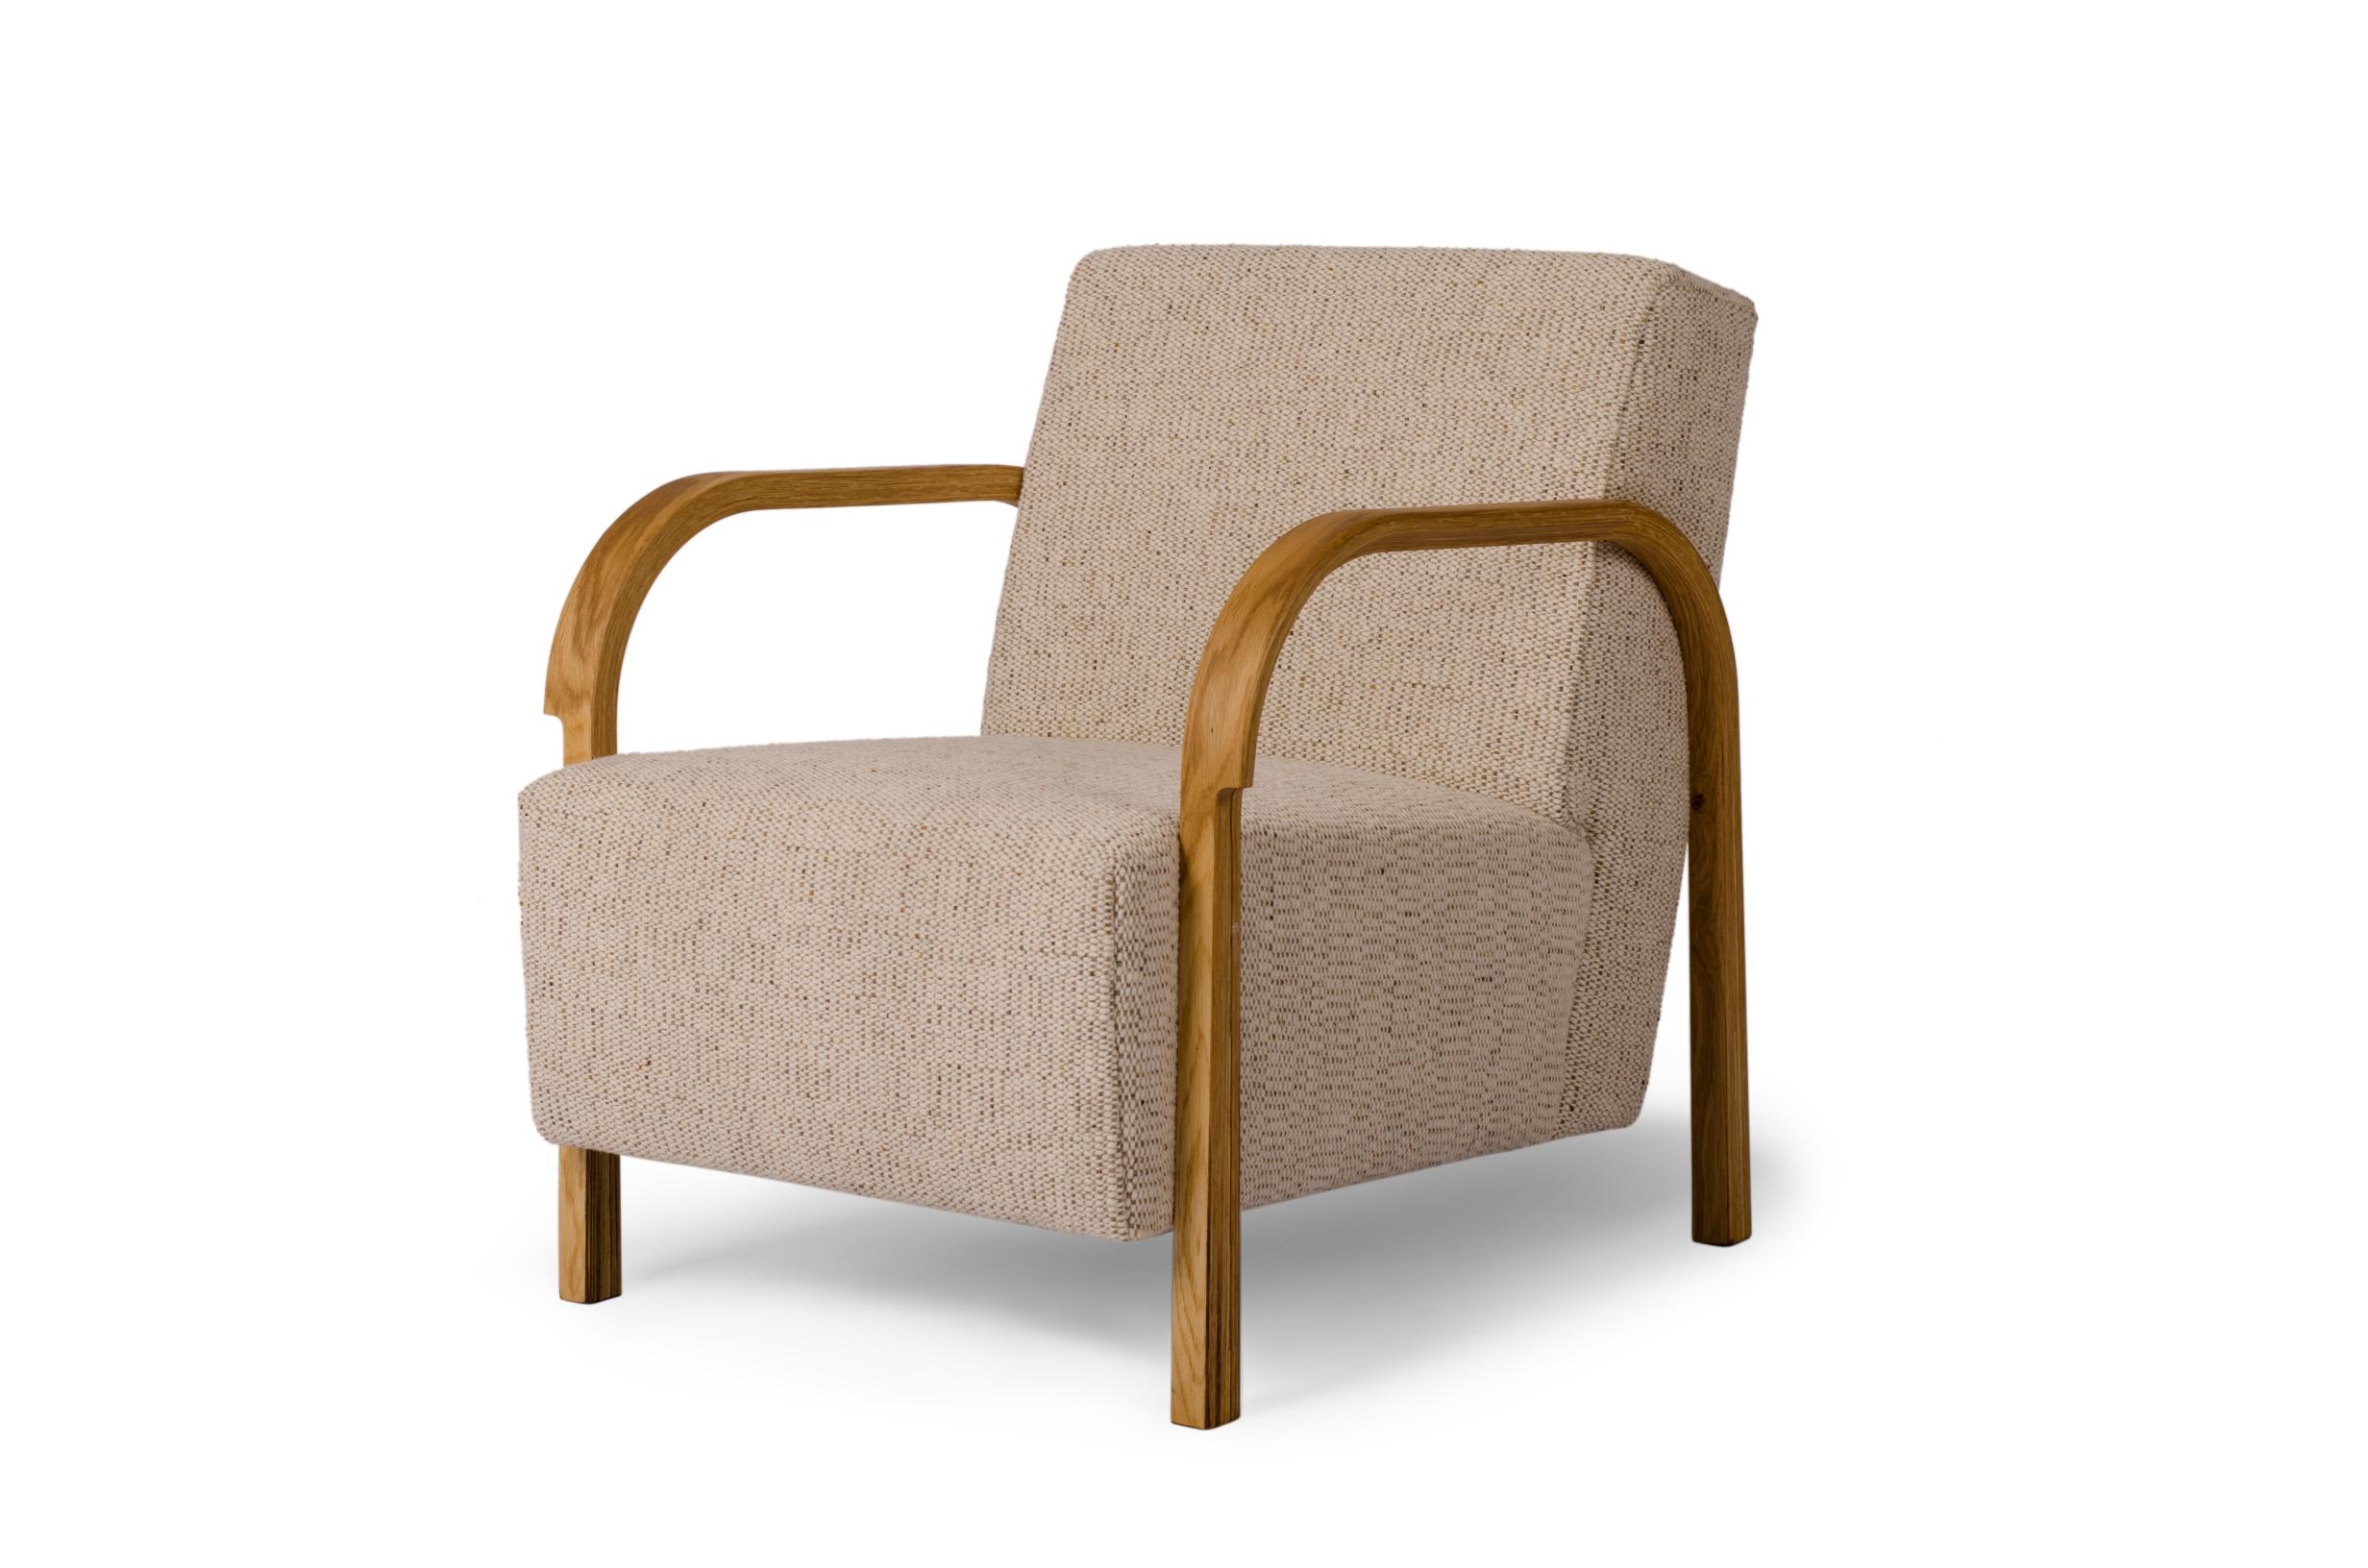 Daw/Mohair & McNutt Arch Lounge Chair by Mazo Design
Dimensions: W 69 x D 79 x H 76 cm
Materials: oak, textile 

With the new Arch collection, mazo forges new paths with their forward-looking modernism. The series is a tribute to the renowned